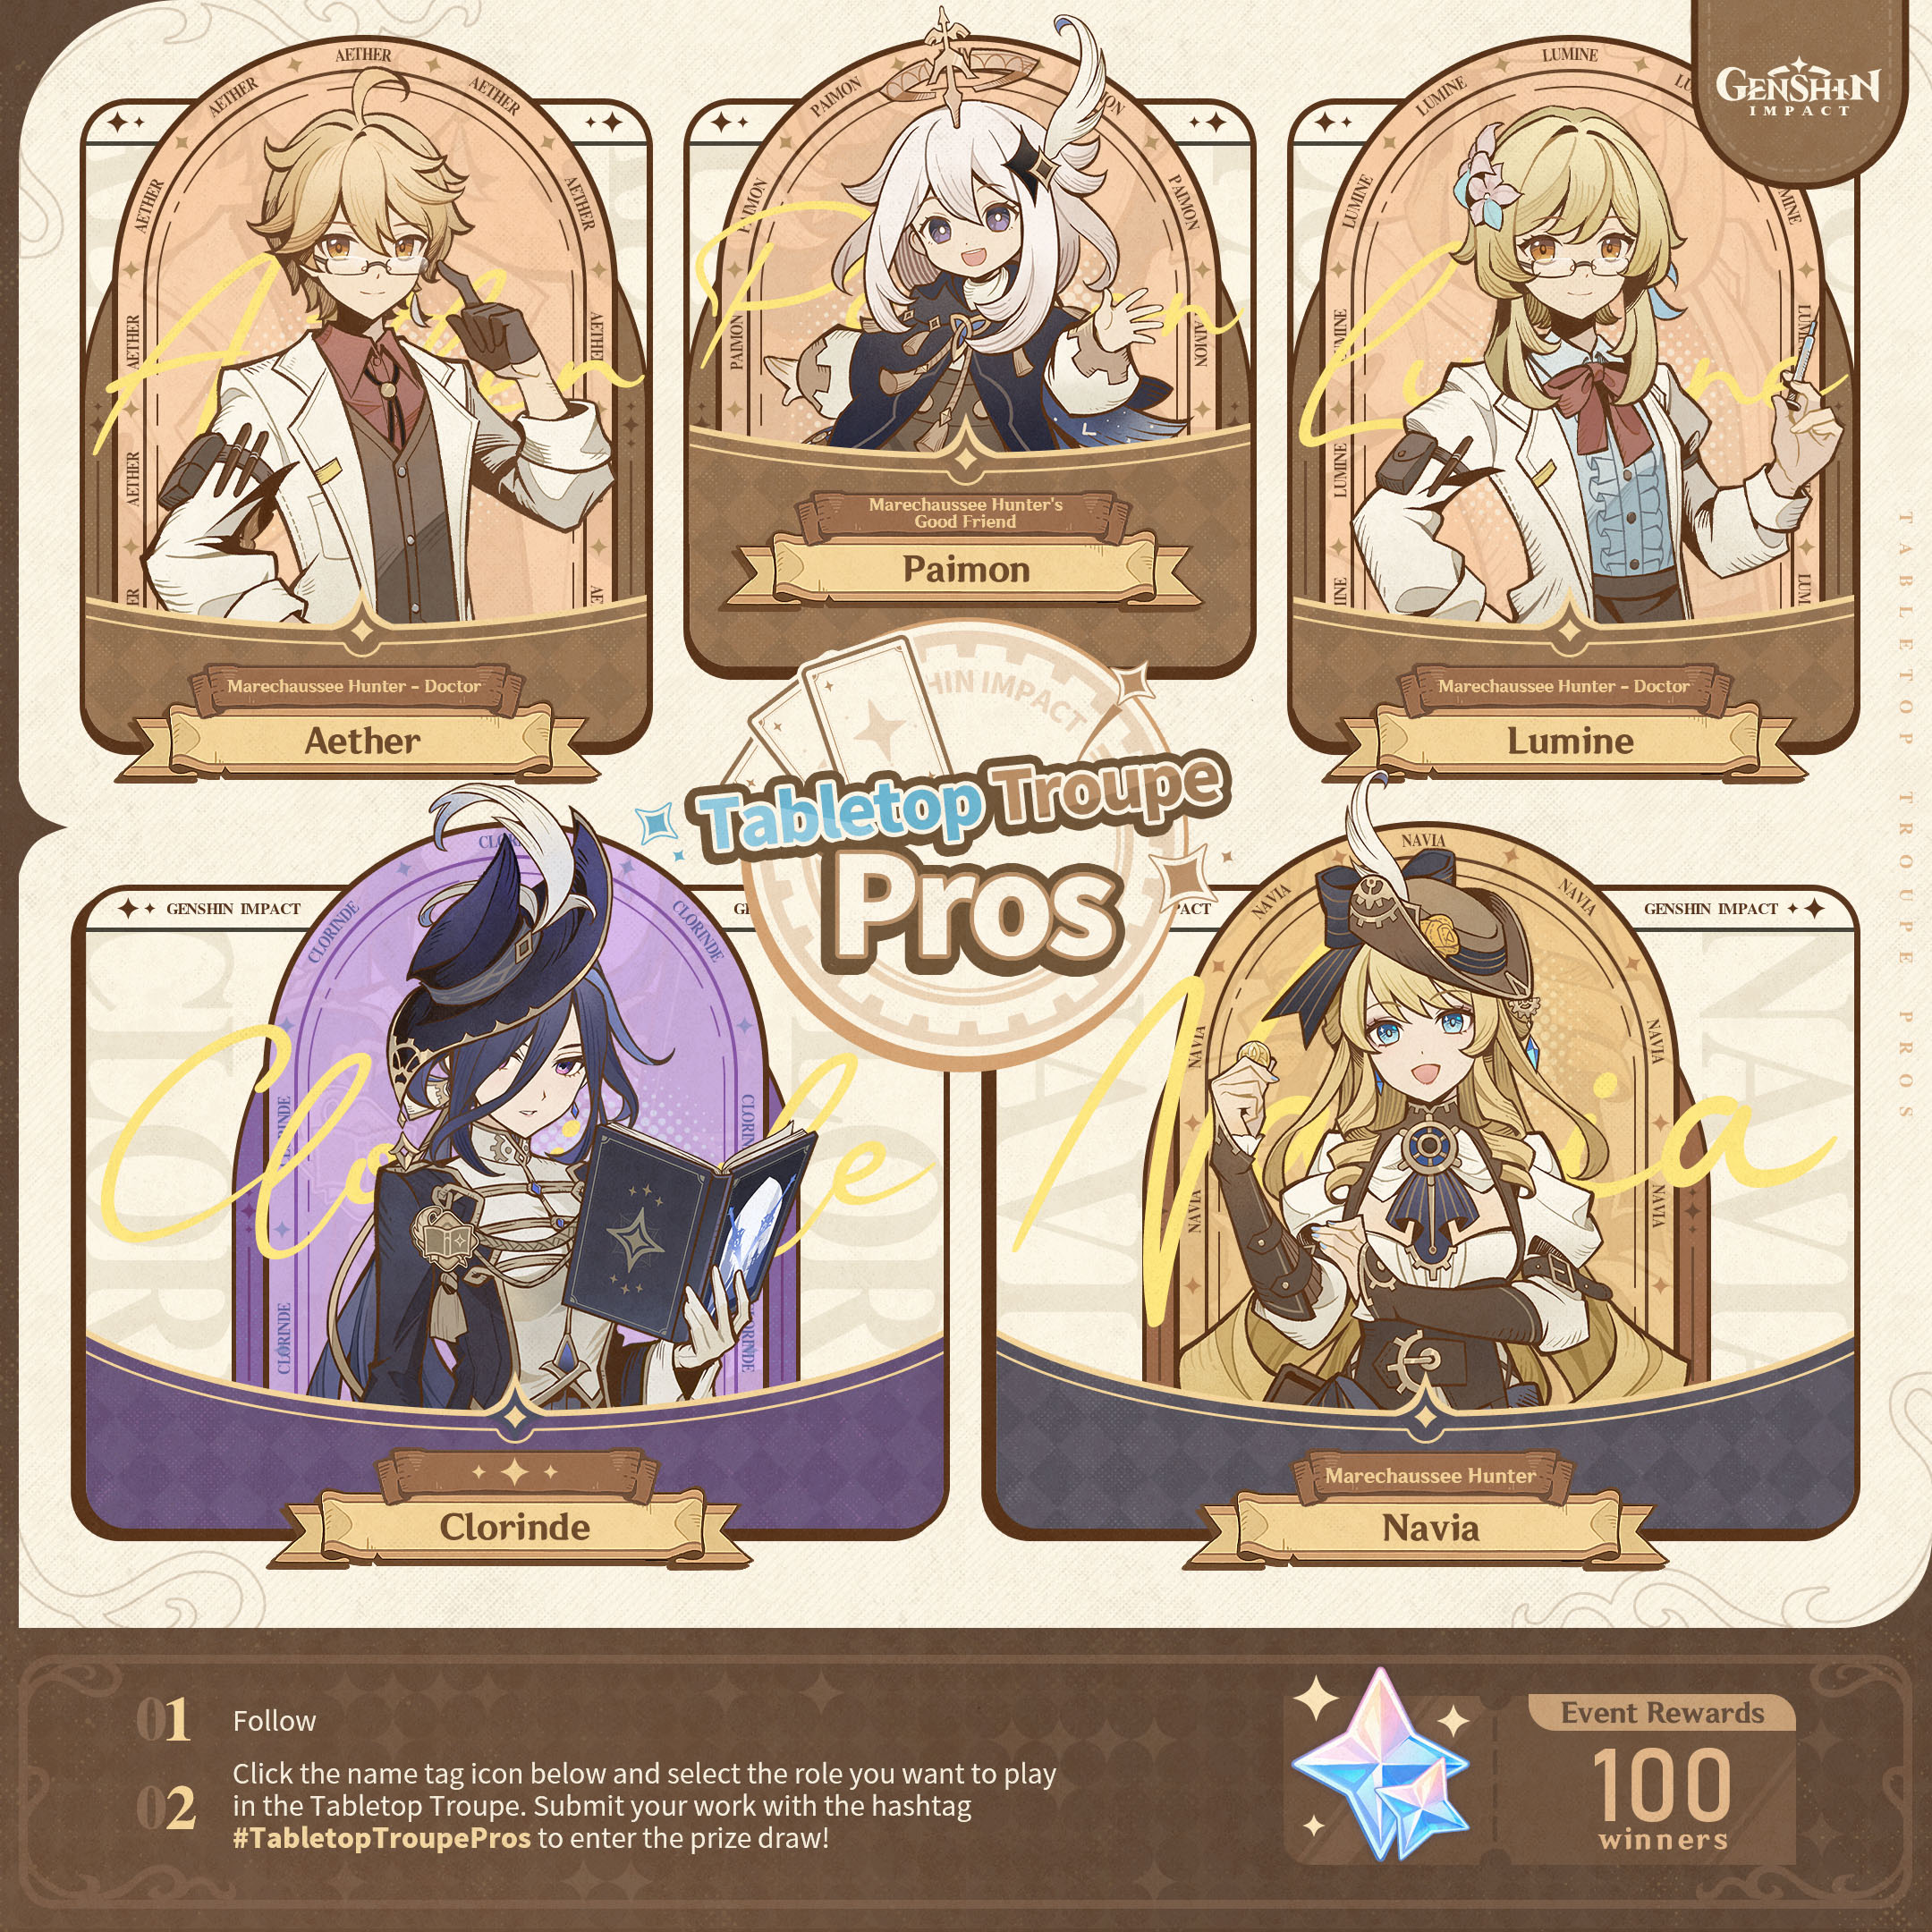 "Tabletop Troupe Pros" - Take Part in the Event to Win Primogems!